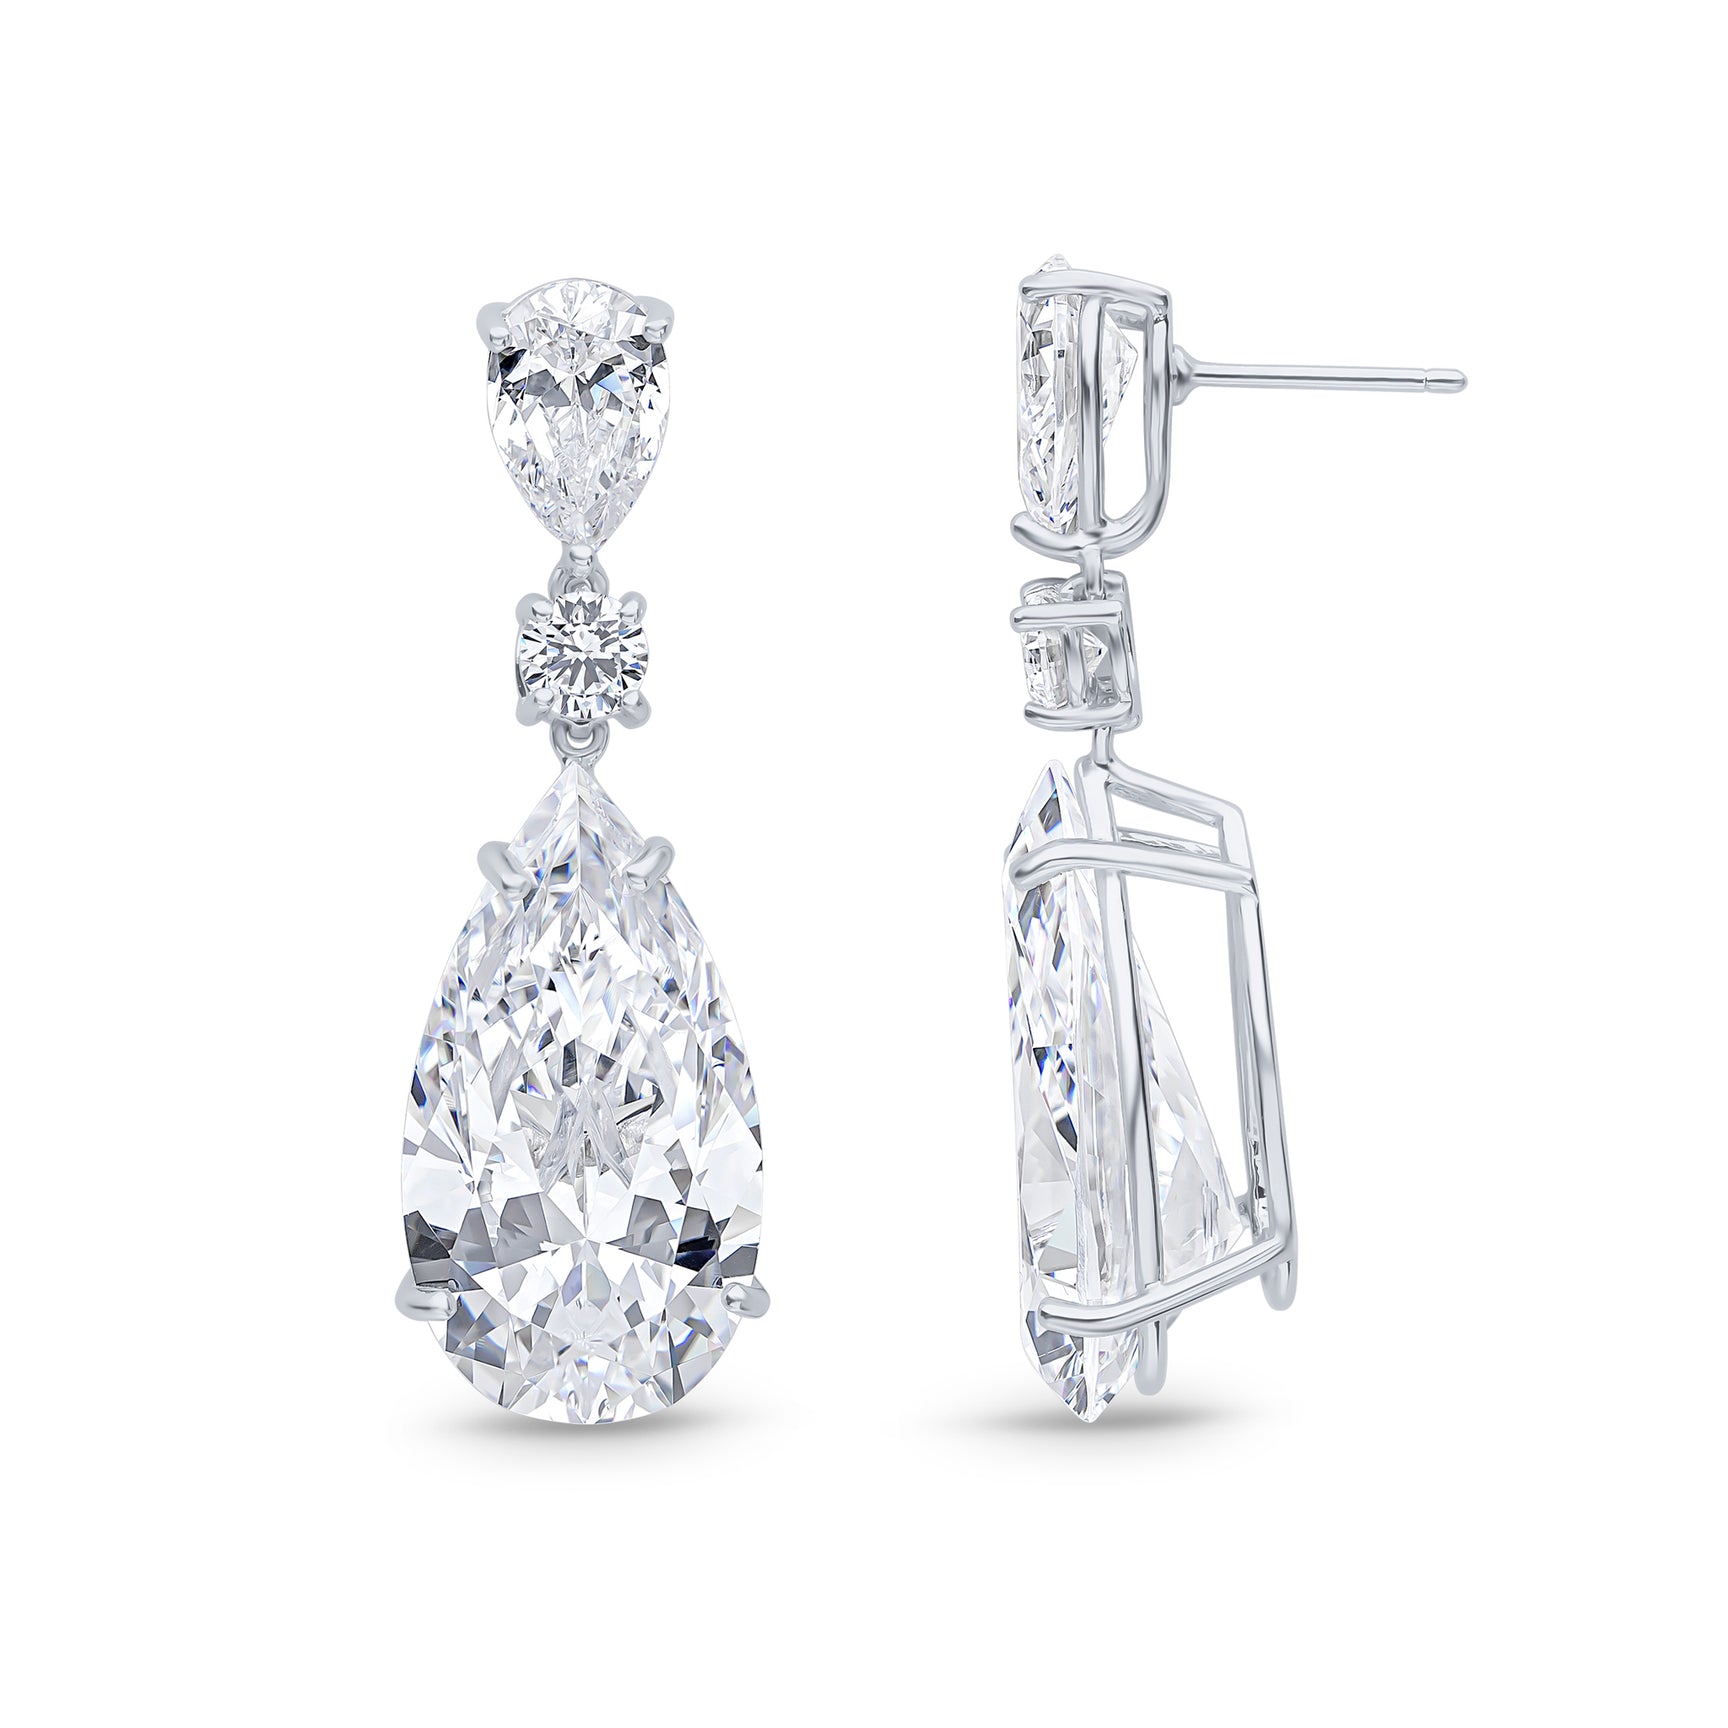 The Finest Cubic Zirconia Jewellery Since 1917 – C I R O